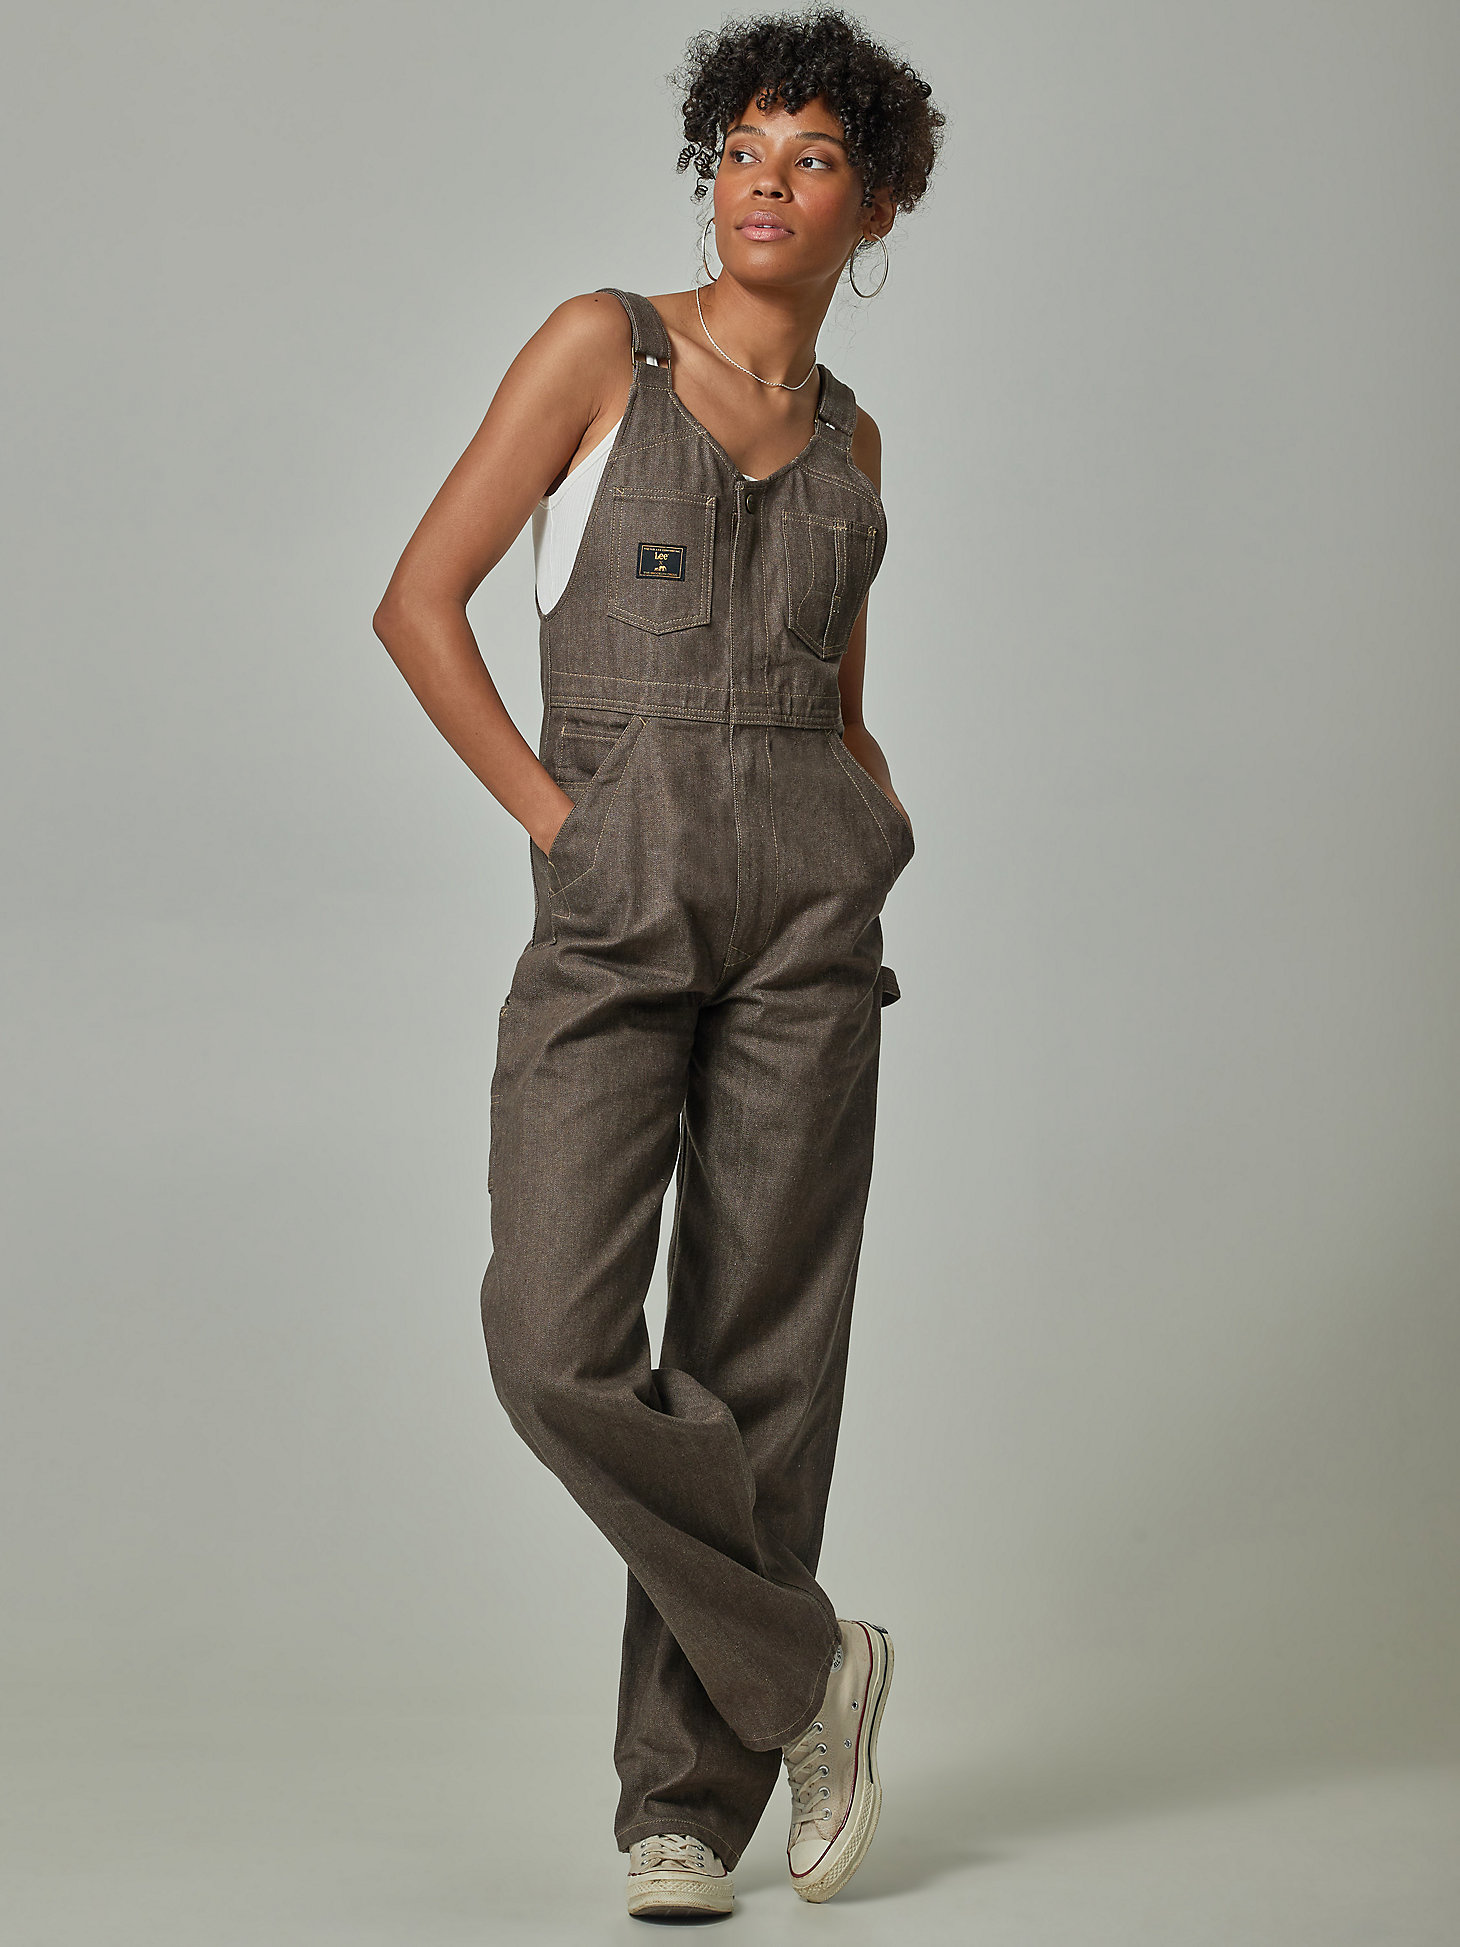 Lee® x The Brooklyn Circus® Whizit Overall in Brown alternative view 6